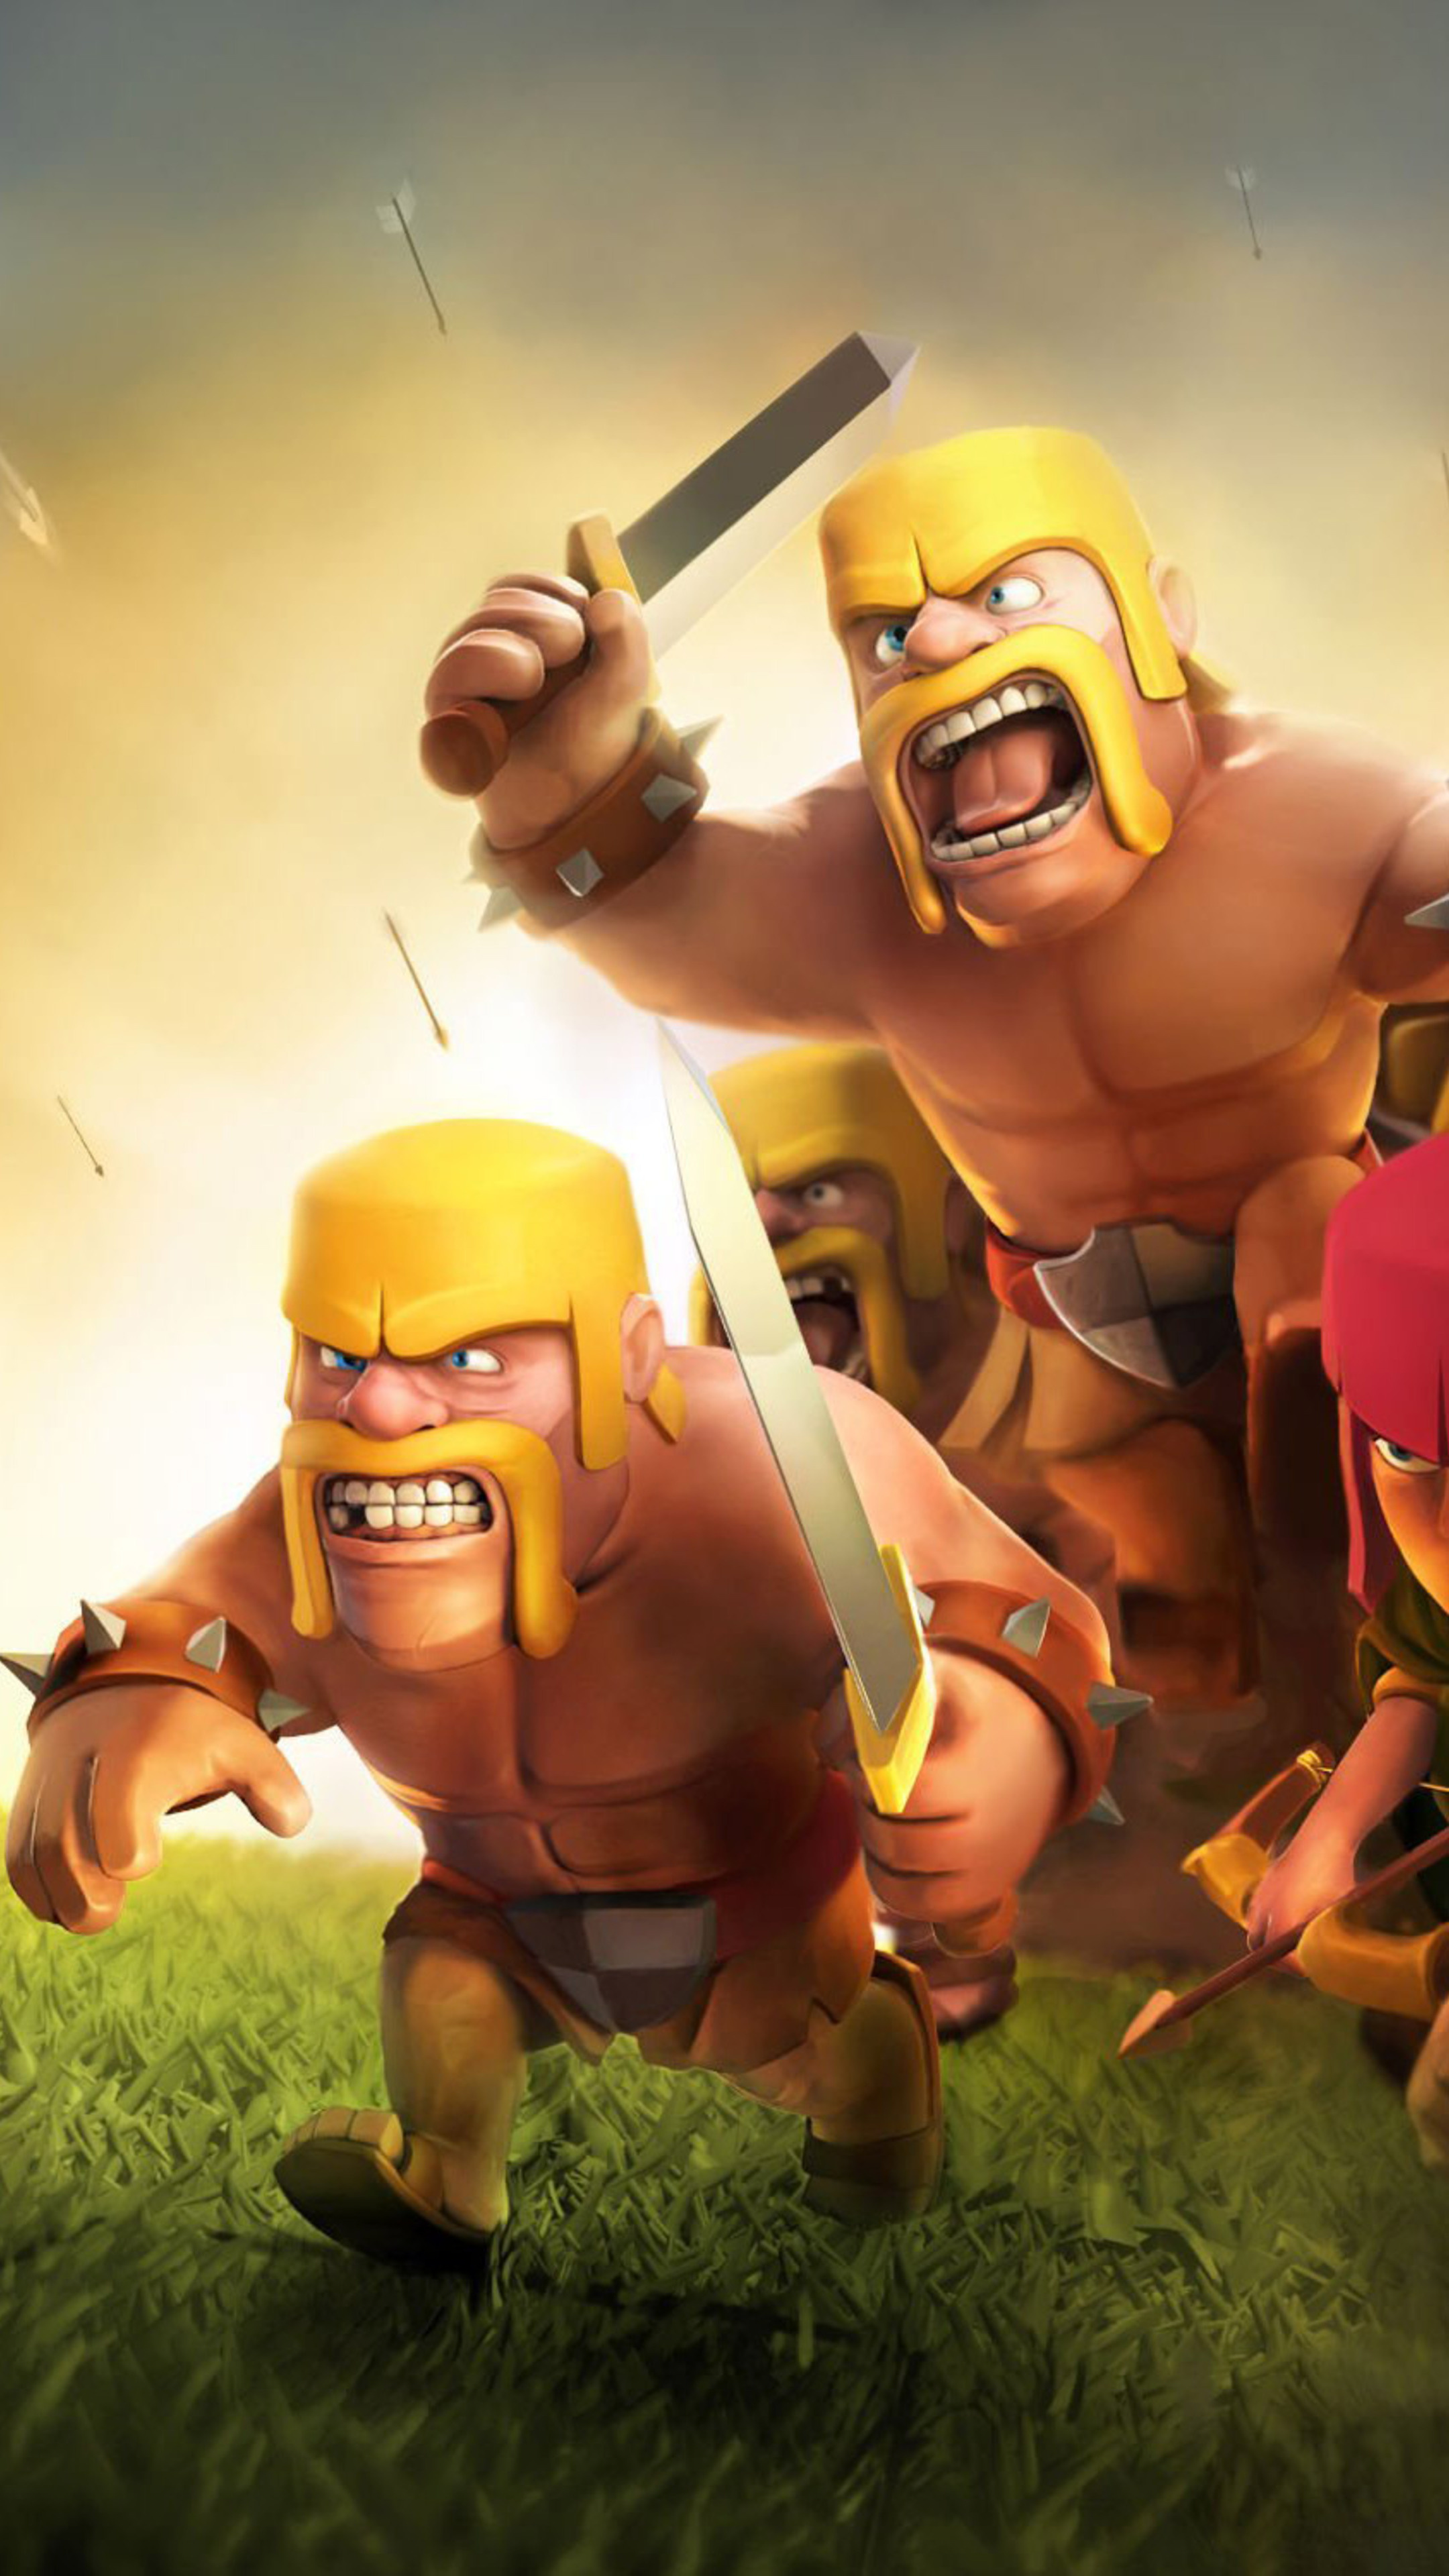 Clash of Clans: An online multiplayer game in which players form communities called clans. 2160x3840 4K Wallpaper.